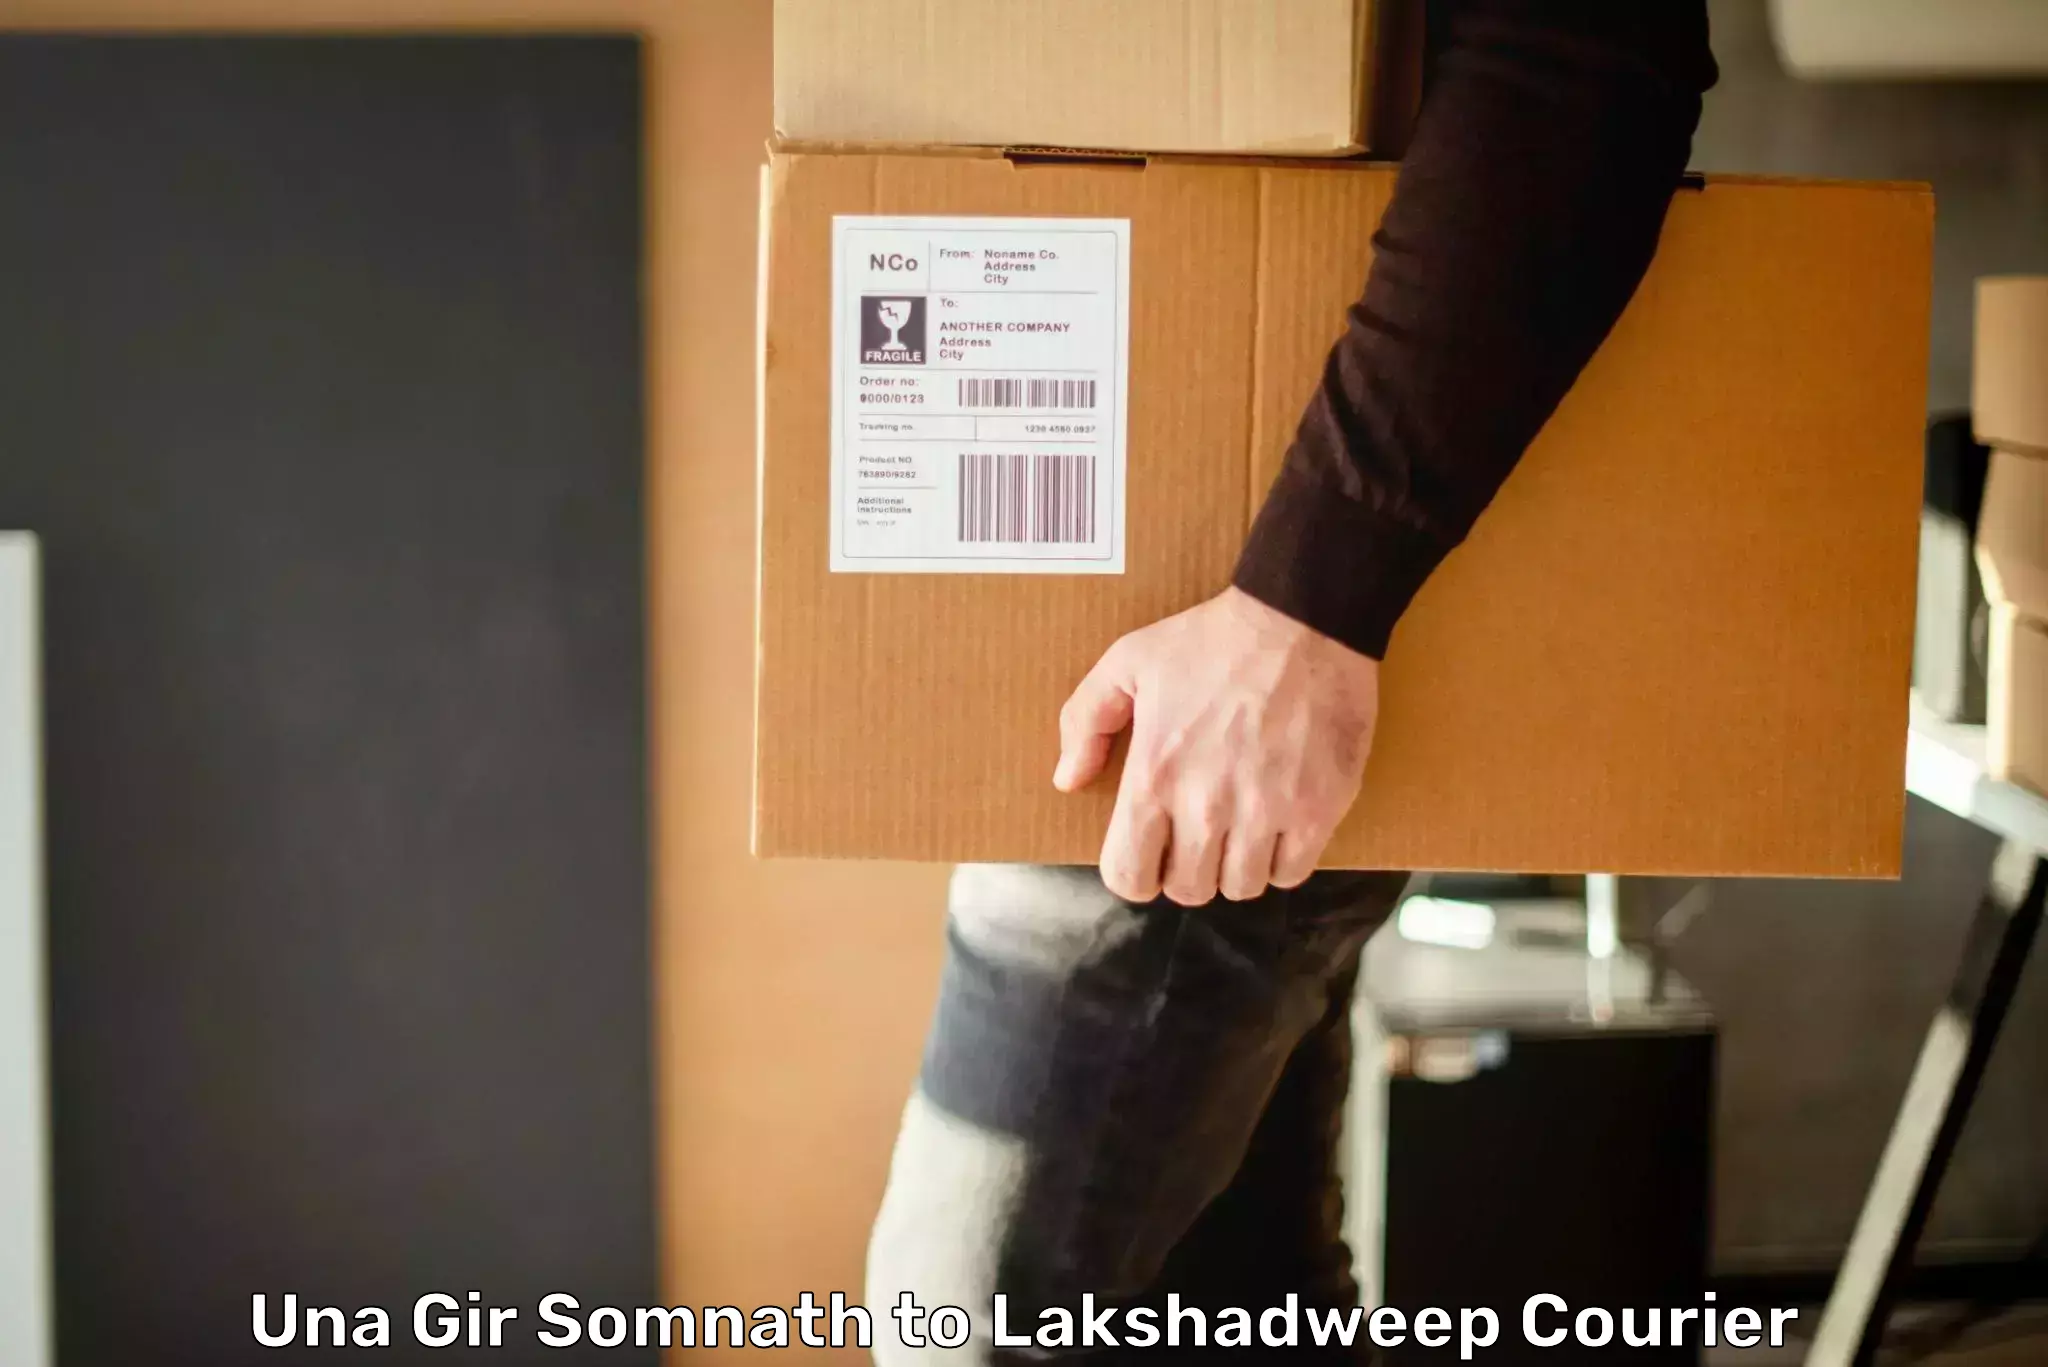 Dynamic courier operations Una Gir Somnath to Lakshadweep